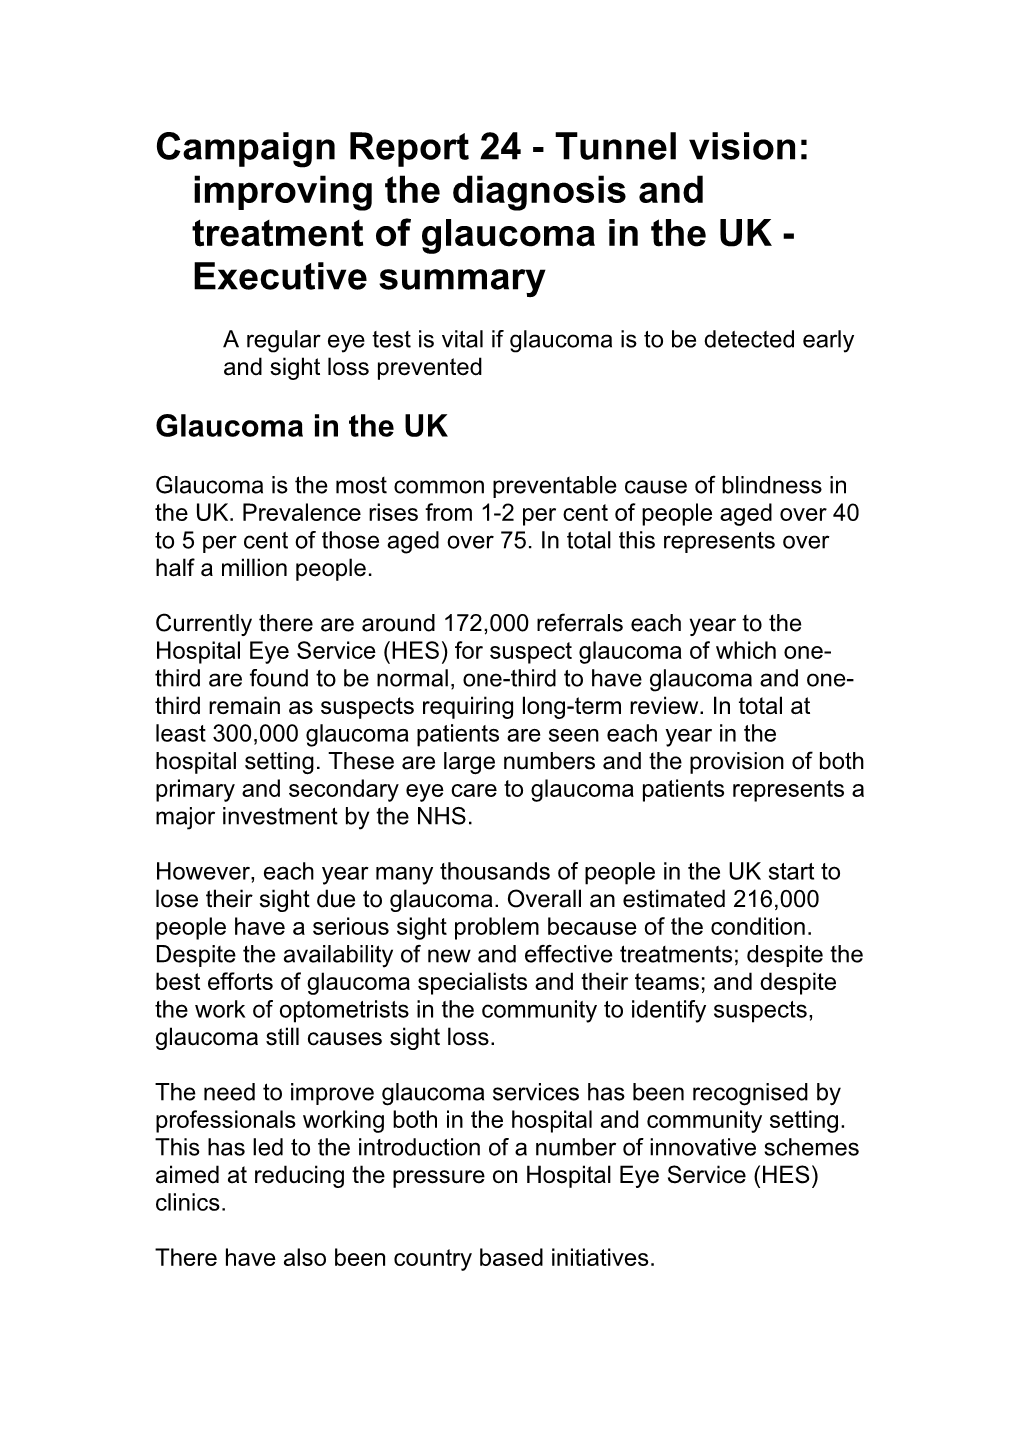 Campaign Report 24 - Tunnel Vision: Improving the Diagnosis and Treatment of Glaucoma In